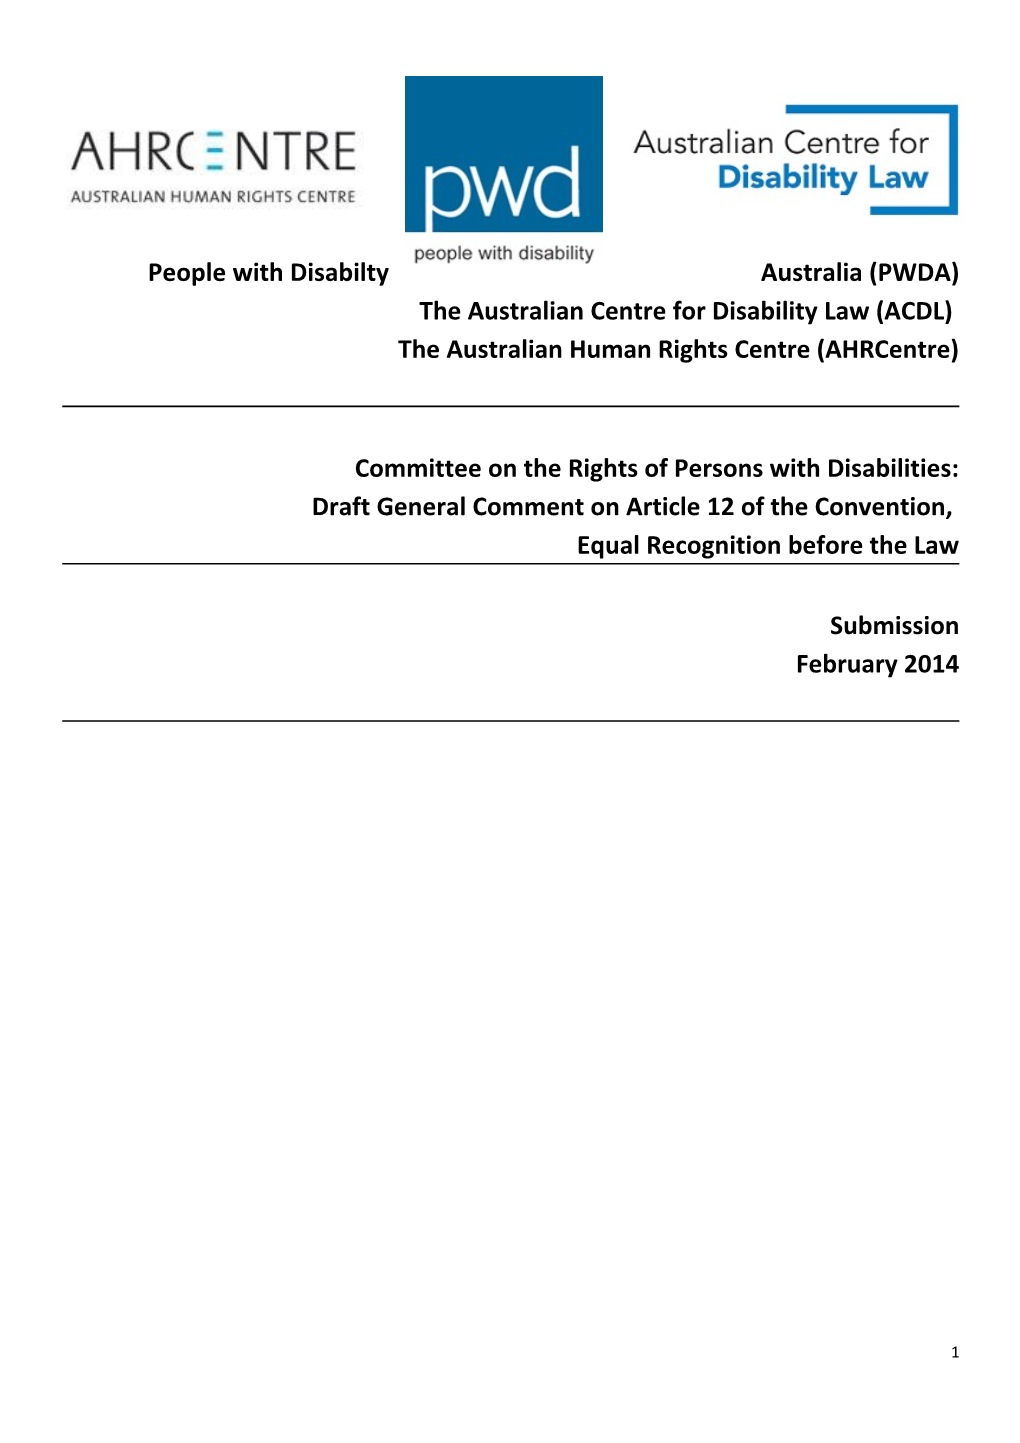 The Australian Centre for Disability Law (ACDL)